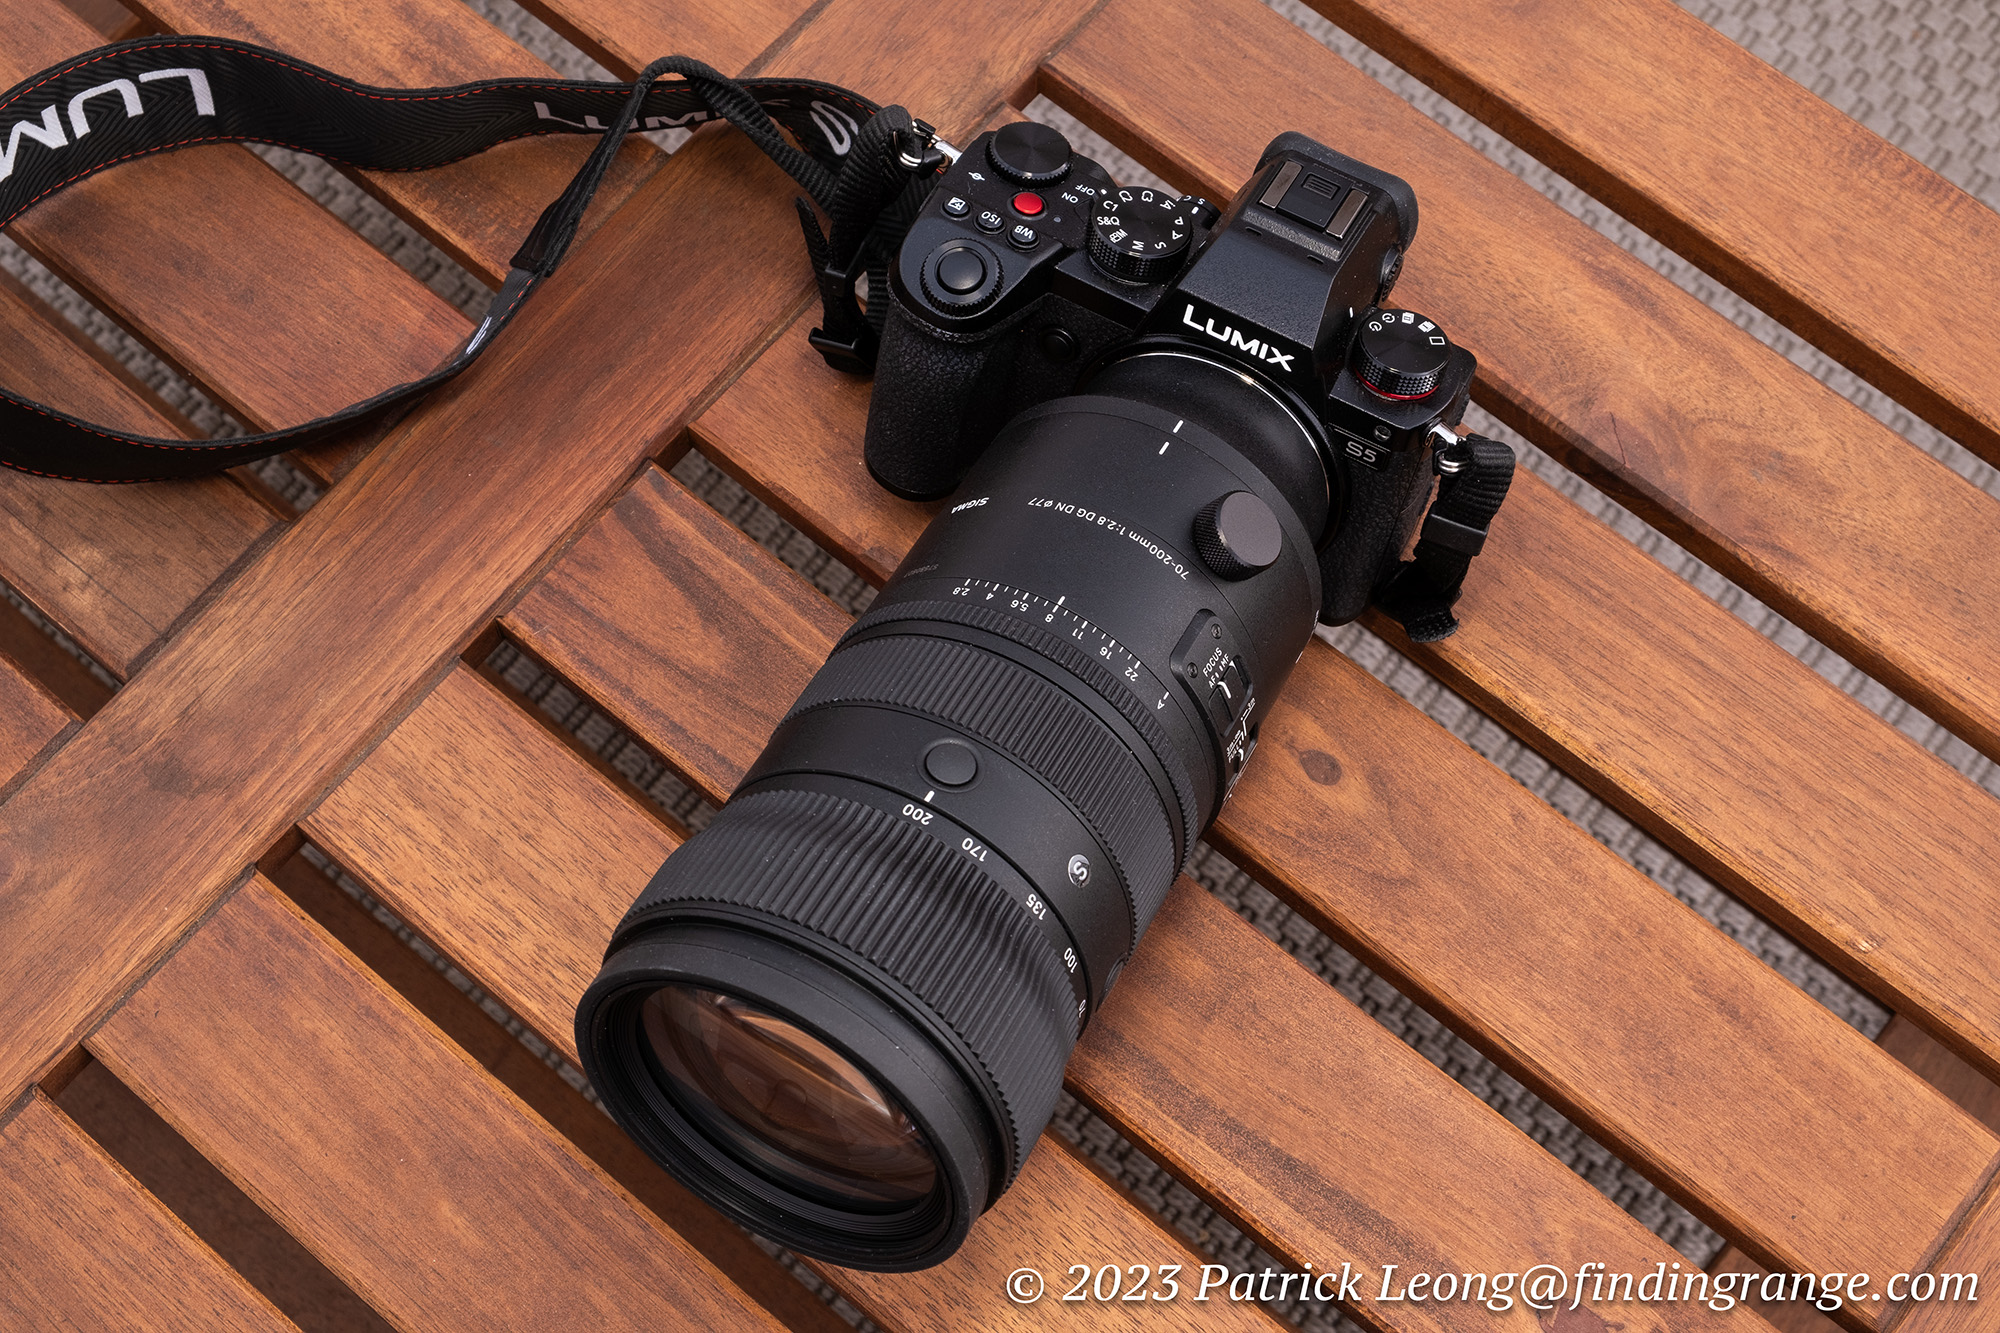 Sigma 70-200mm f/2.8 DG DN OS Sports Lens Review: Long Awaited